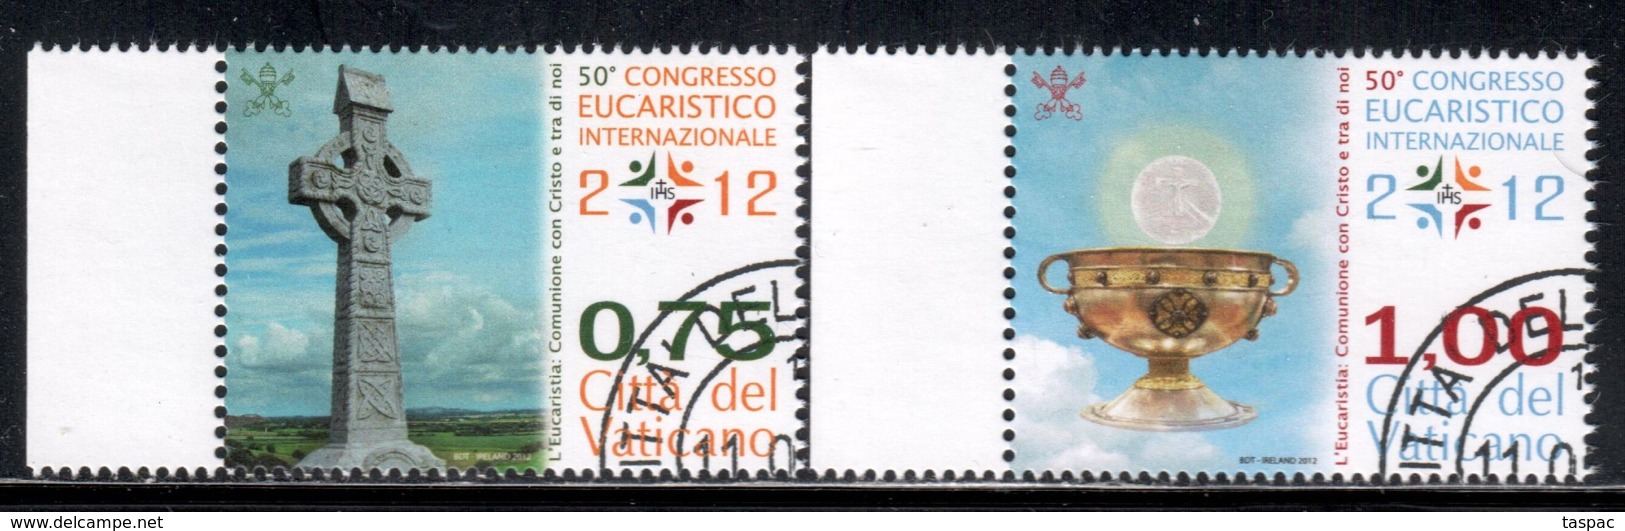 Vatican 2012 Mi# 1738-1739 Used - 50th International Eucharistic Congress - Used Stamps